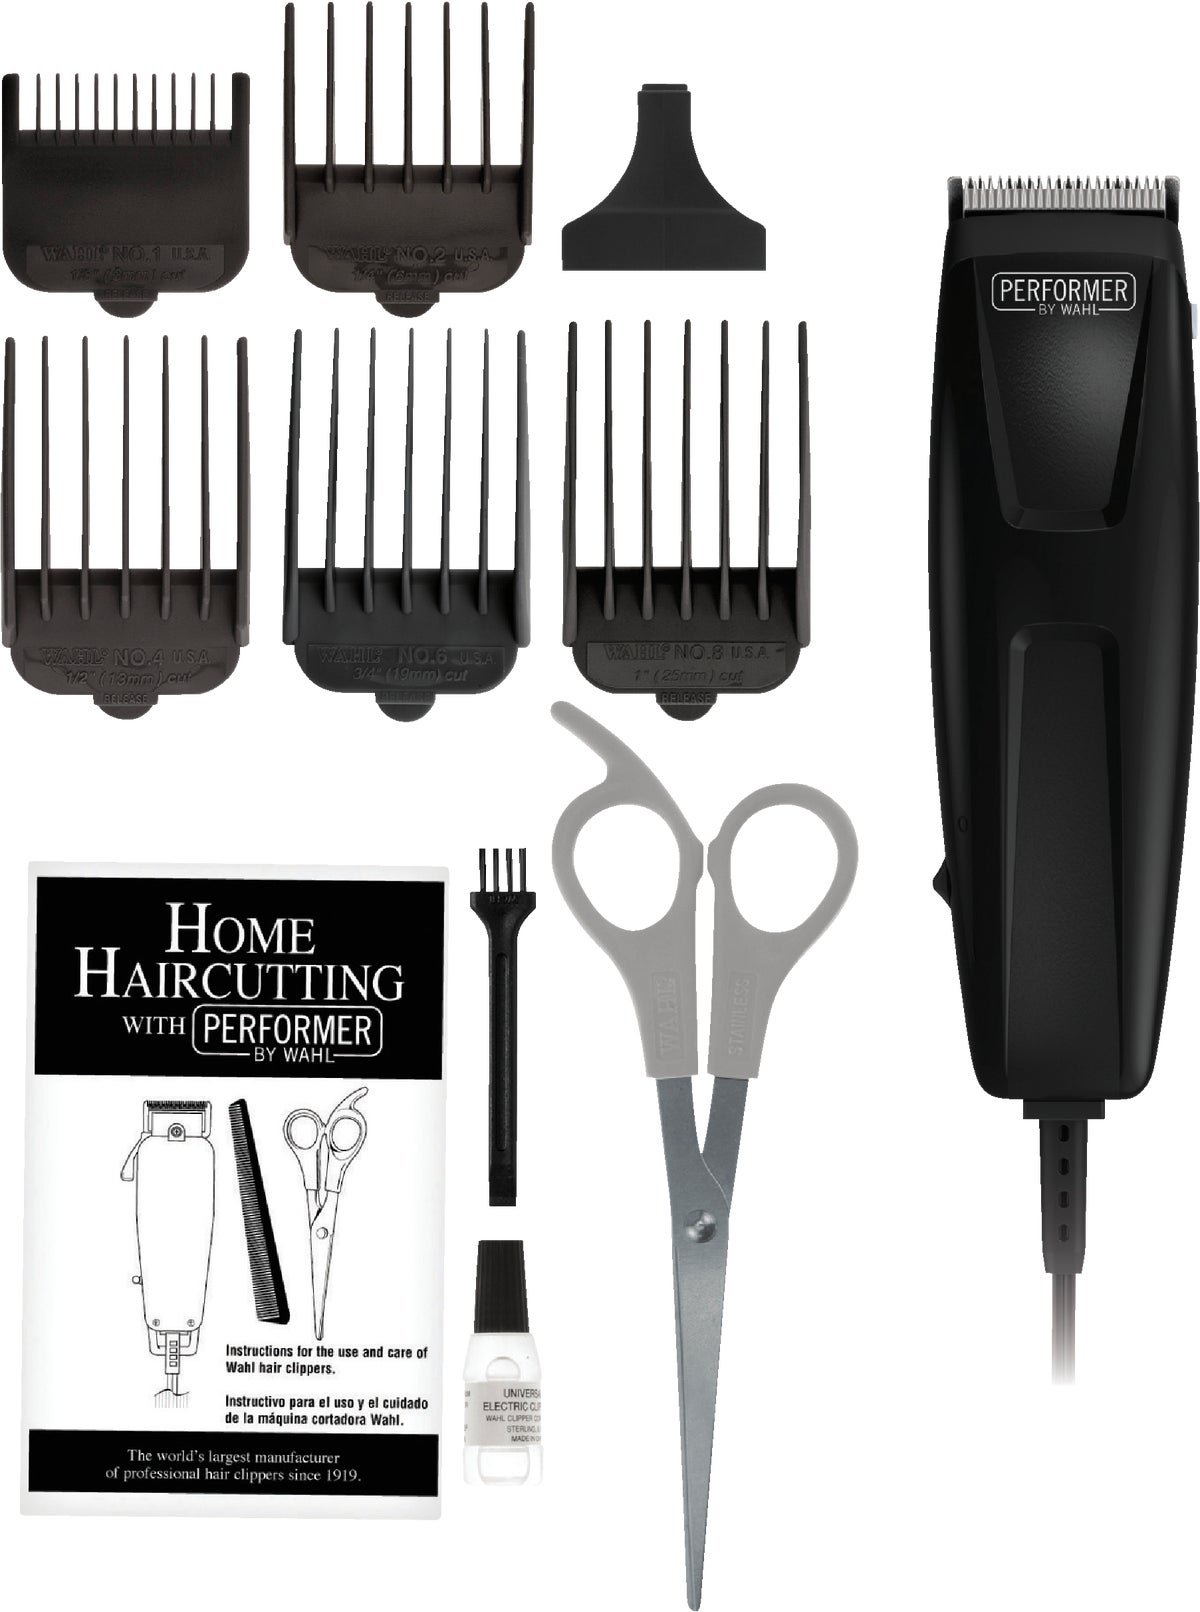 wahl clipper haircut instructions